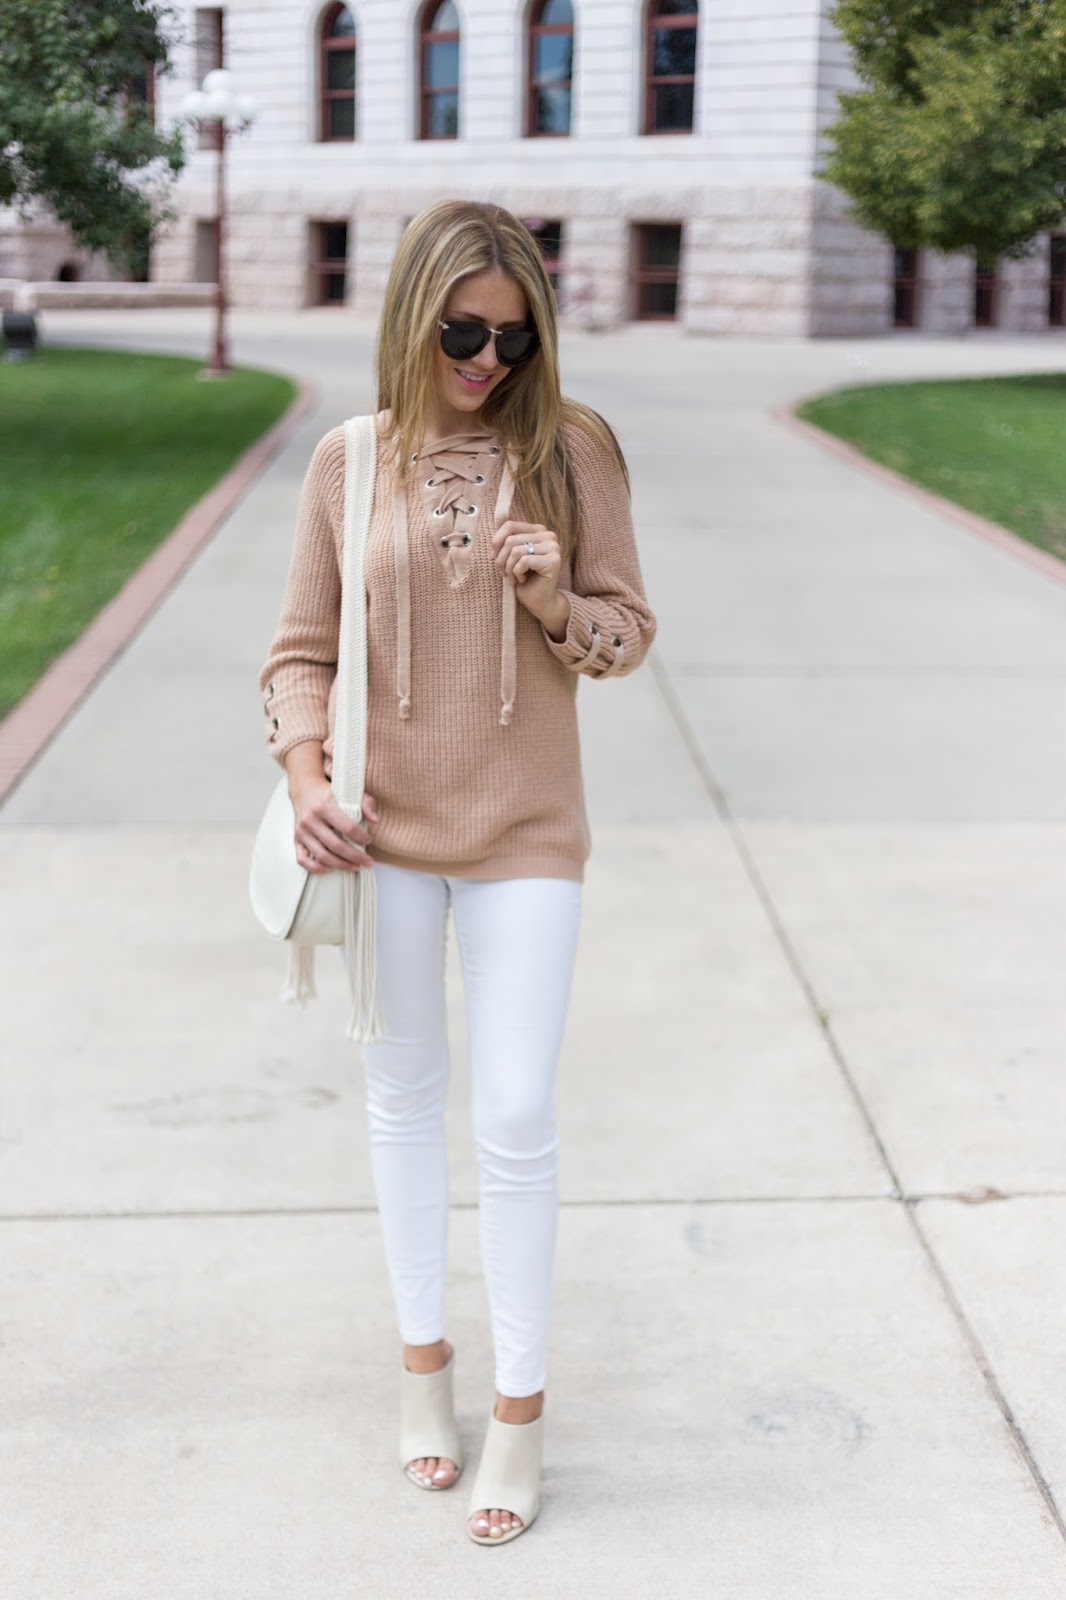 Lace-up Sweater + $550 Nordstrom Giveaway! - Leah Behr